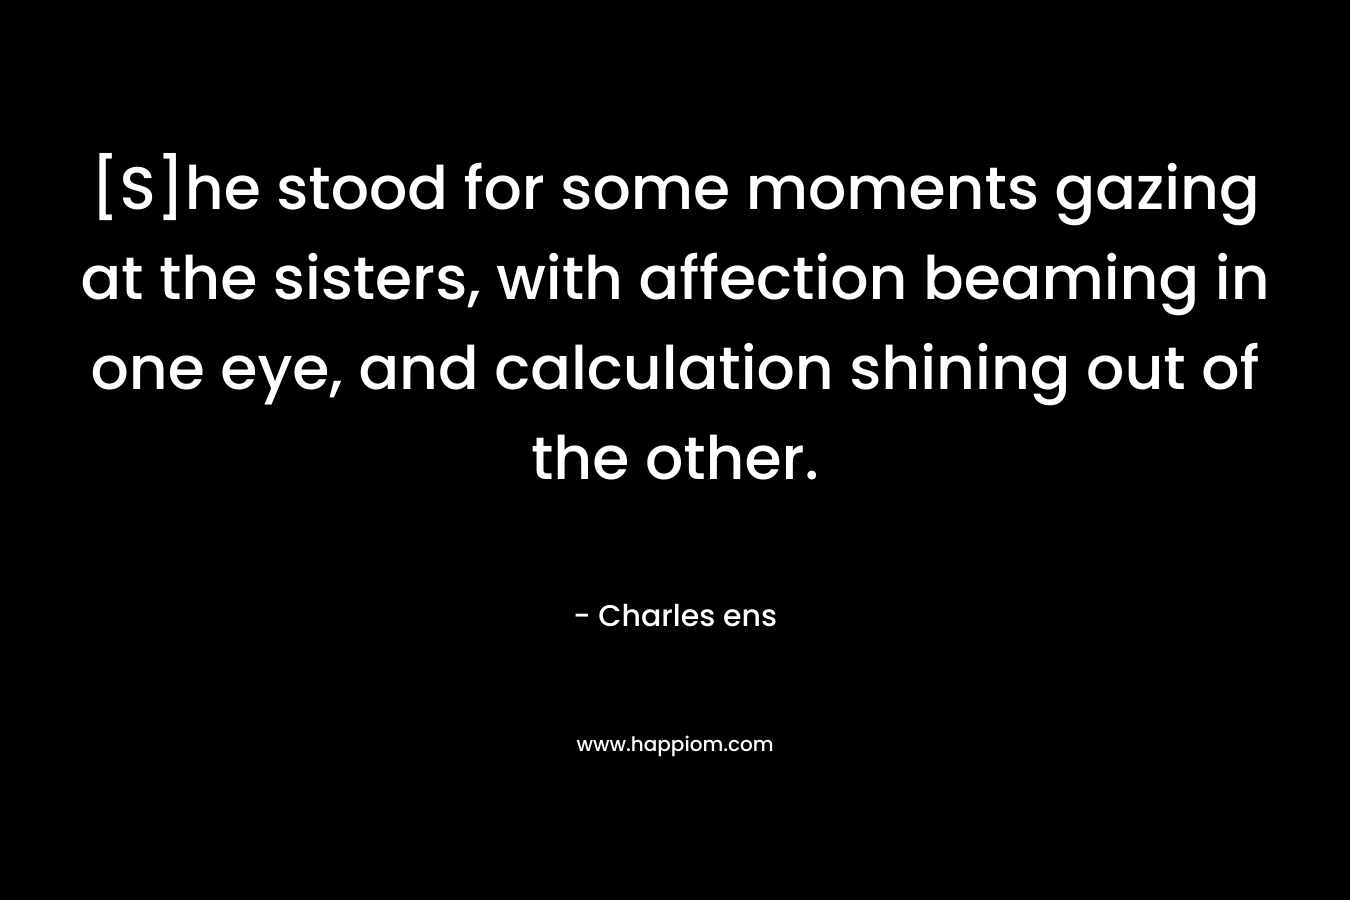 [S]he stood for some moments gazing at the sisters, with affection beaming in one eye, and calculation shining out of the other. – Charles ens